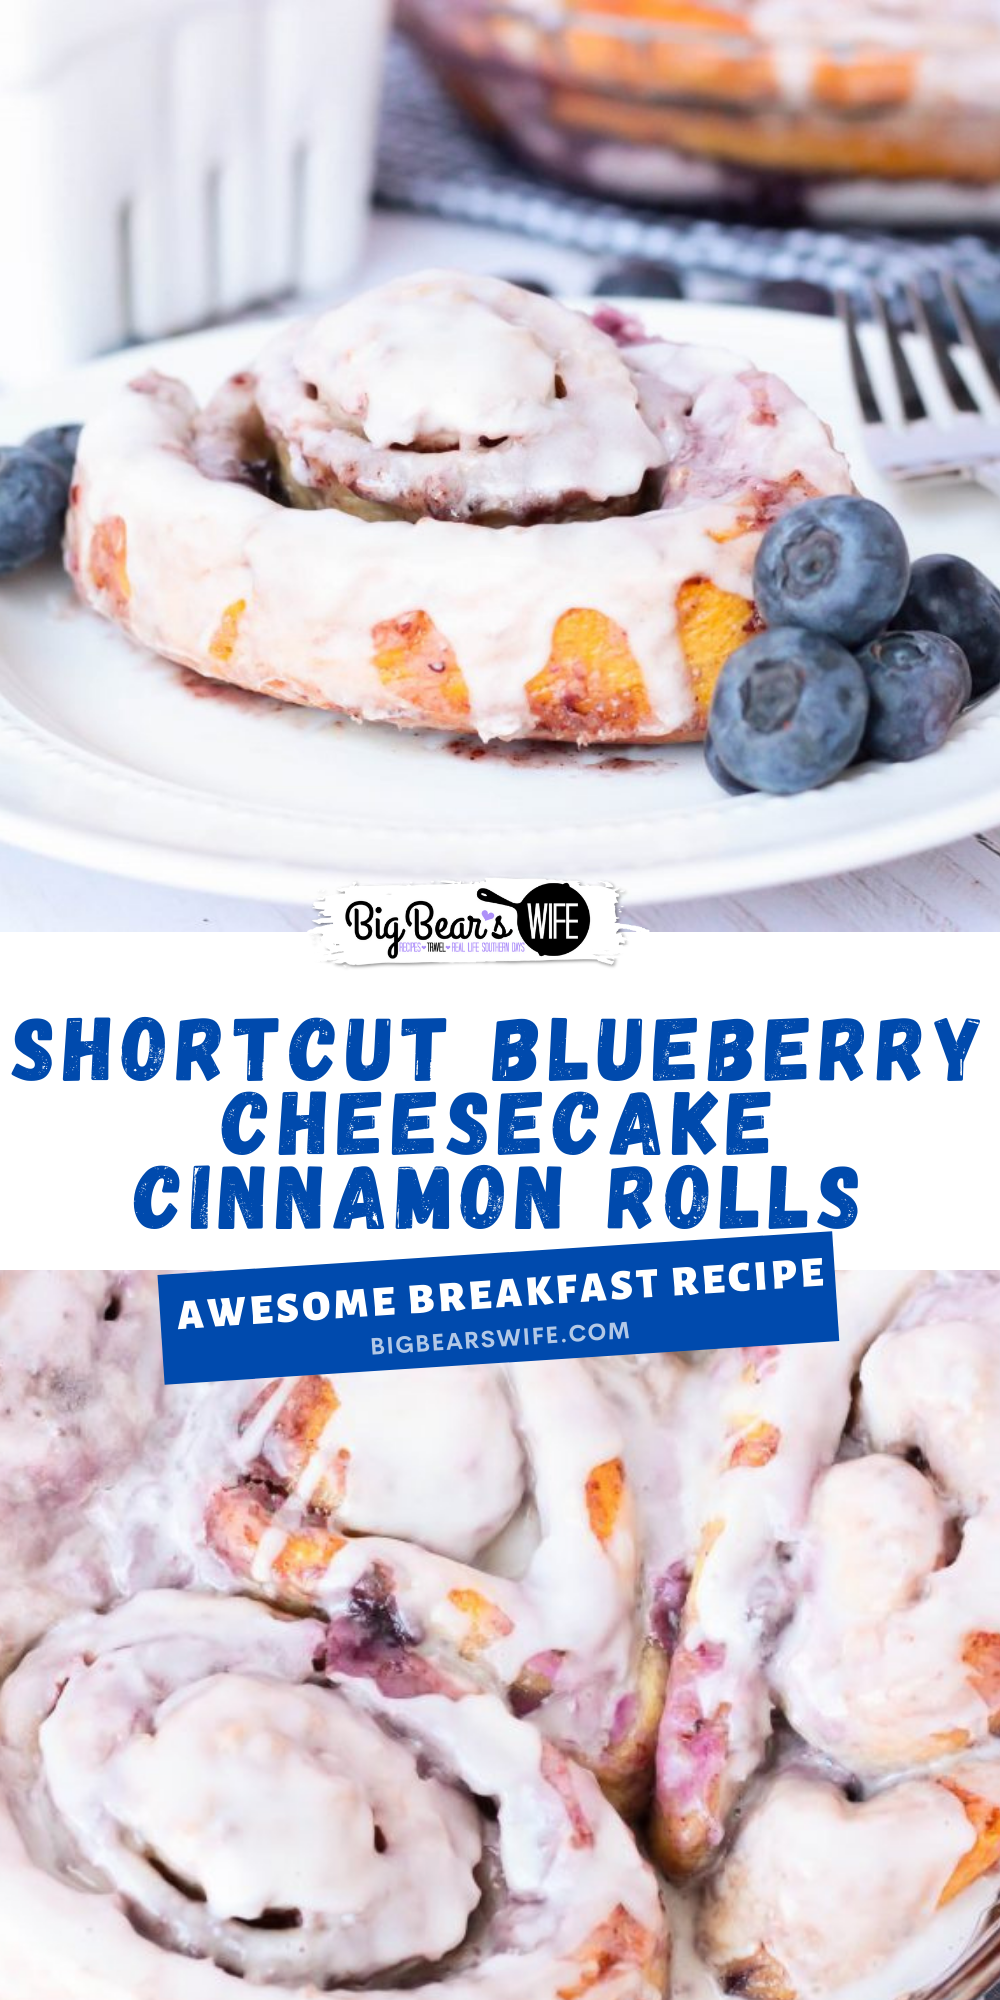 These Shortcut Blueberry Cheesecake Cinnamon Rolls use store bought cinnamon rolls and a homemade blueberry cheesecake filling to create a delicious breakfast or brunch that's perfect for the weekend! Make the blueberry compote the night before for an even faster morning treat! via @bigbearswife